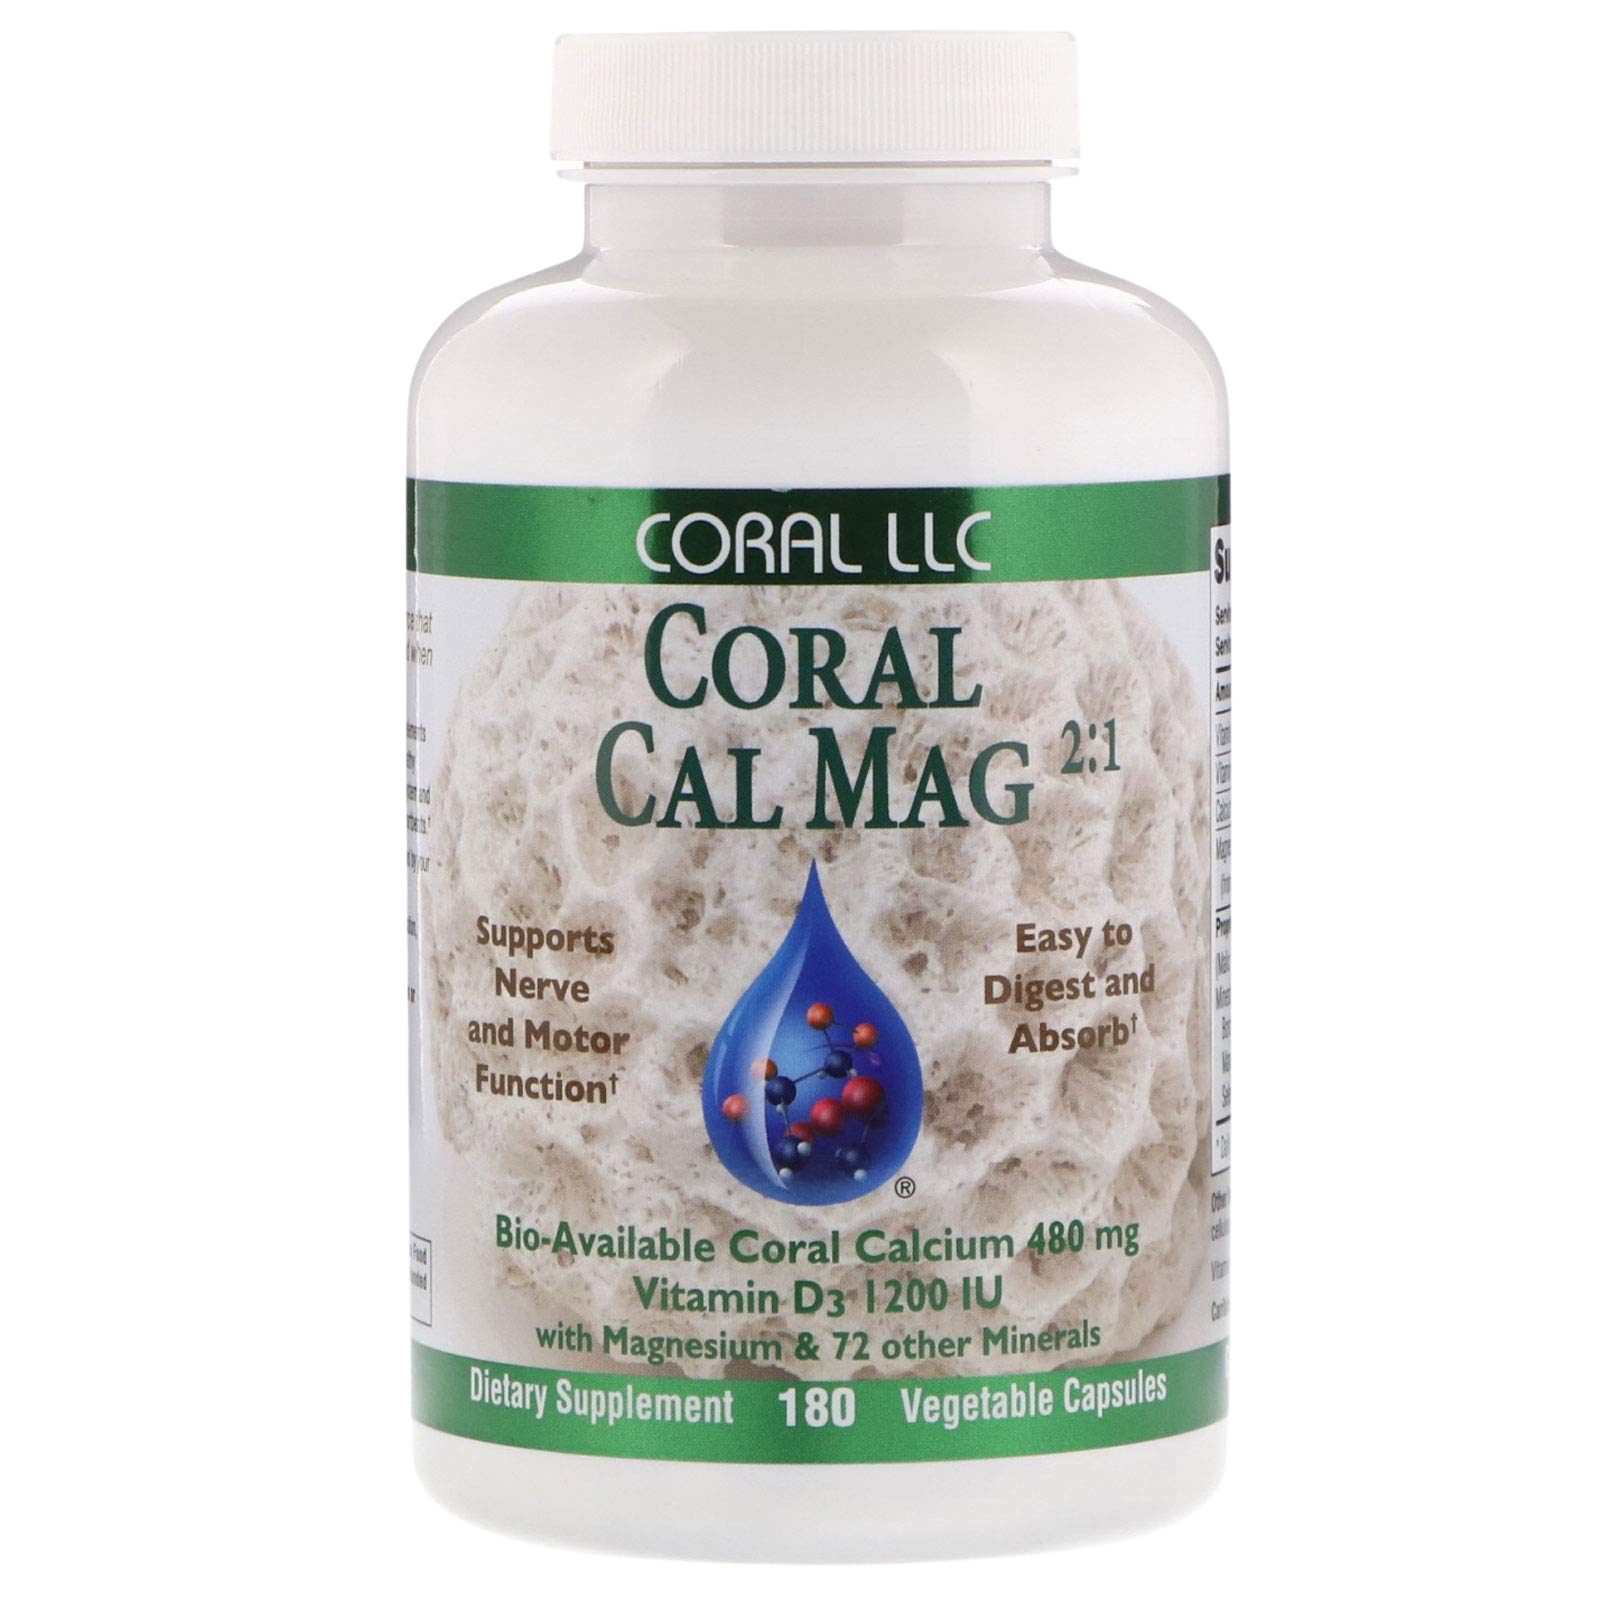 Coral Cal-Mag - Bioavailable Coral Calcium with Magnesium in a 2:1 Ratio